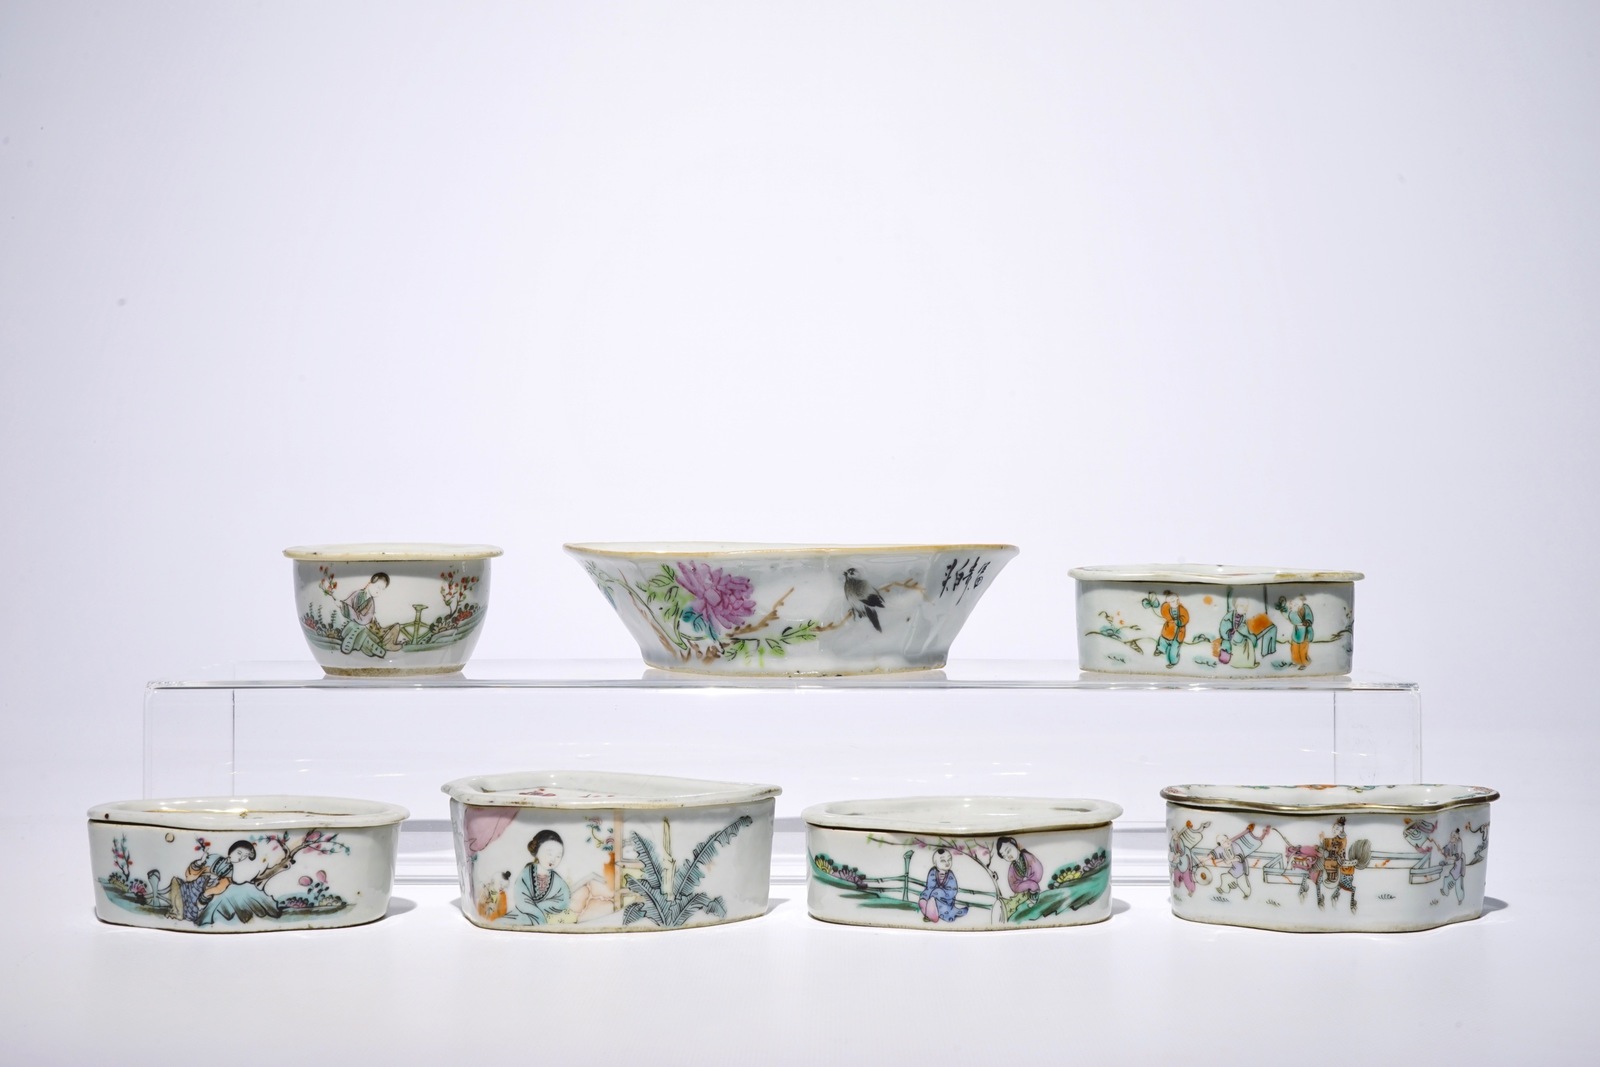 Six Chinese qianjiang cai cricket boxes and a bat-shaped bowl, 19/20th C. L.: 20 cm - W.: 10,5 - Image 2 of 9